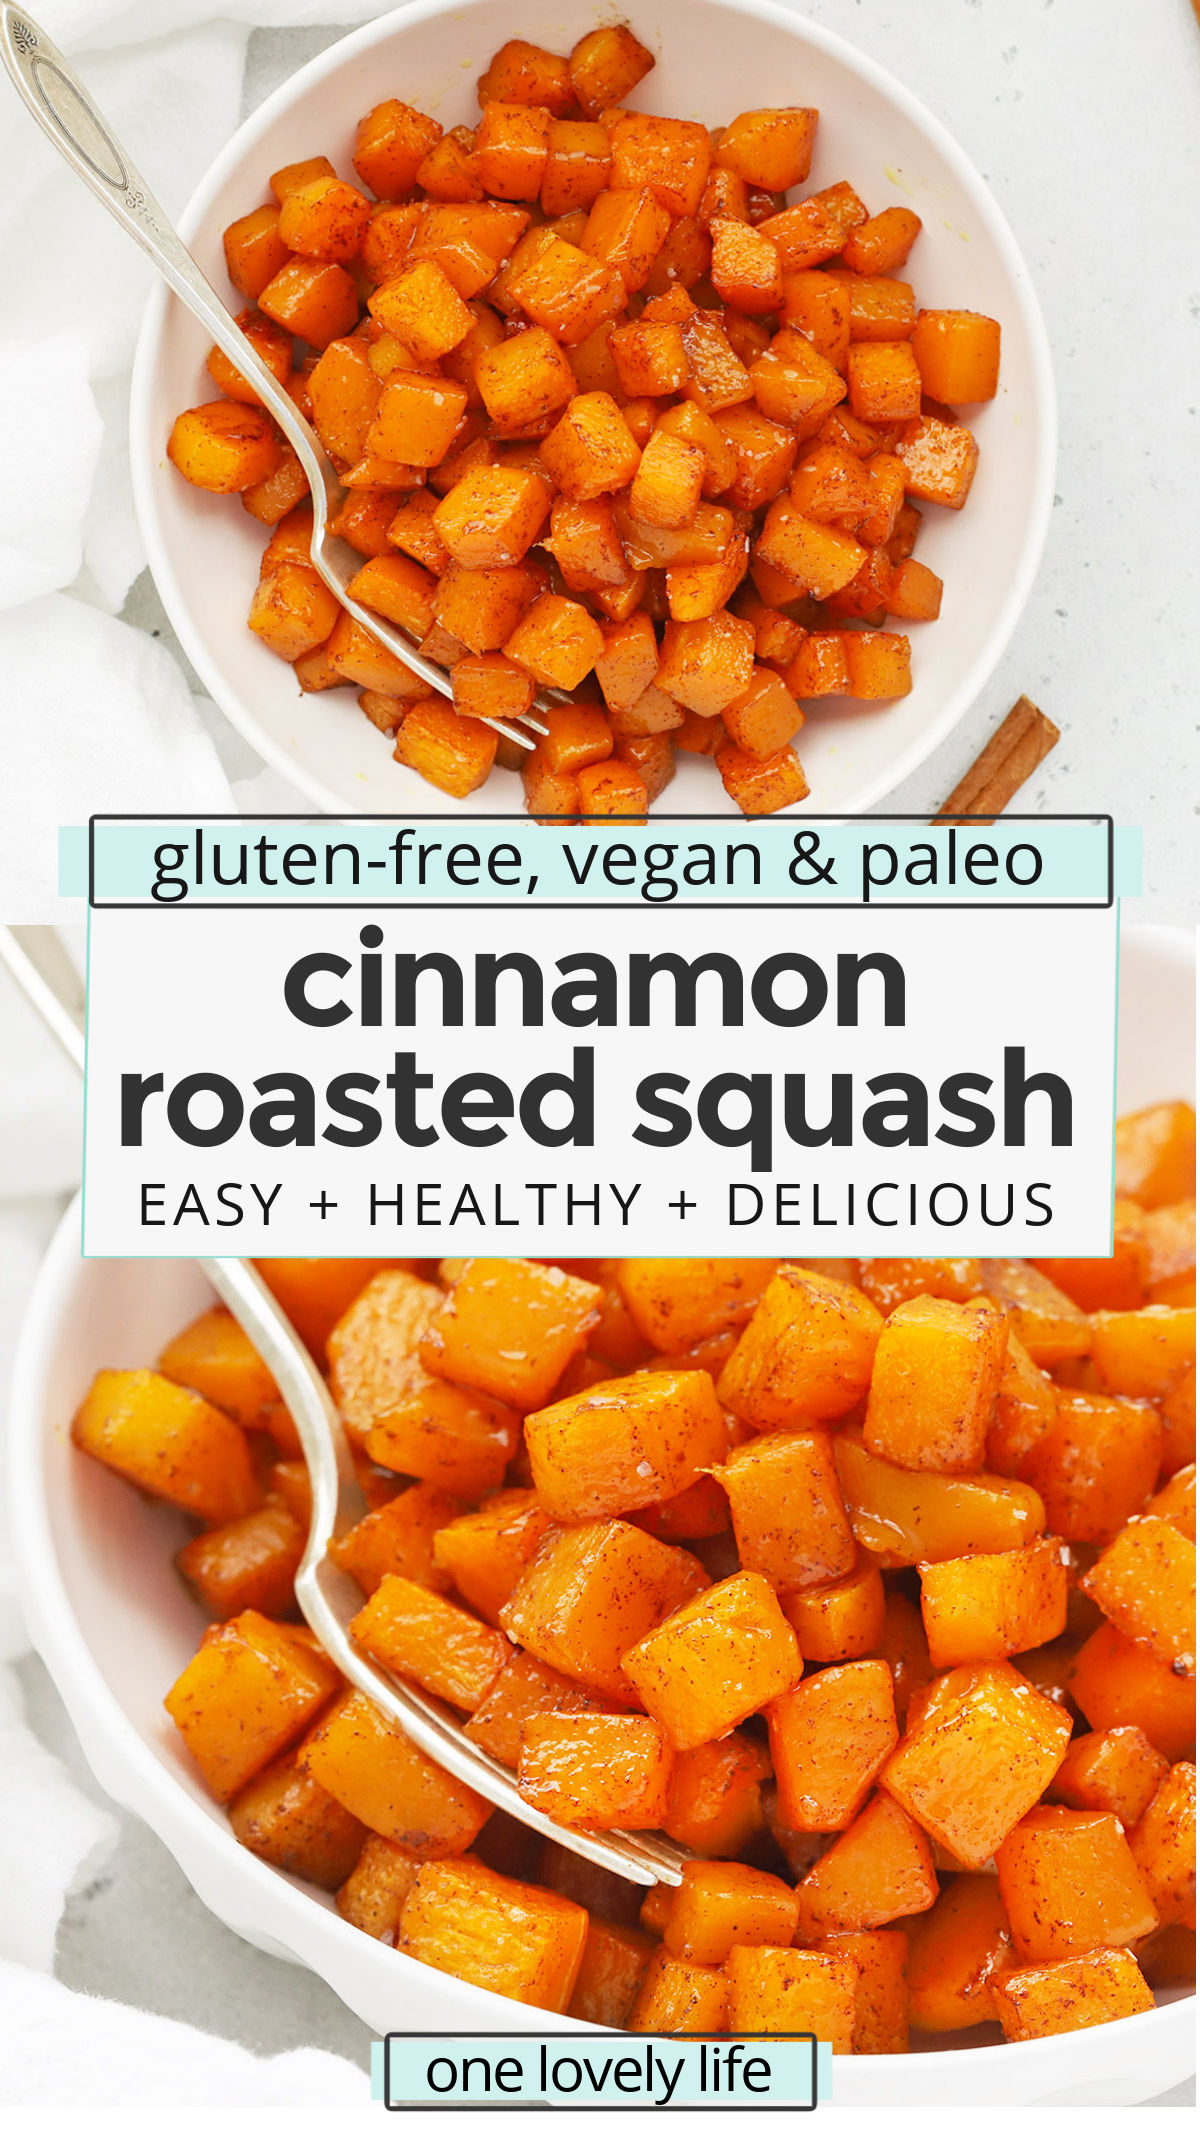 Roasted Cinnamon Butternut Squash - this easy cinnamon squash is such an easy fall side dish! Perfect for Thanksgiving! (allergy-free, vegan, paleo) // Thanksgiving side dish // Healthy side dish // Healthy thanksgiving recipes // Roasted squash recipe // Cinnamon Squash Recipe // Paleo Thanksgiving Recipes // Vegan Thanksgiving Recipes // Gluten Free Thanksgiving Recipes // Roasted cinnamon squash #thanksgiving #paleo #vegan #glutenfree #sidedish #squash #thanksgivingsidedish